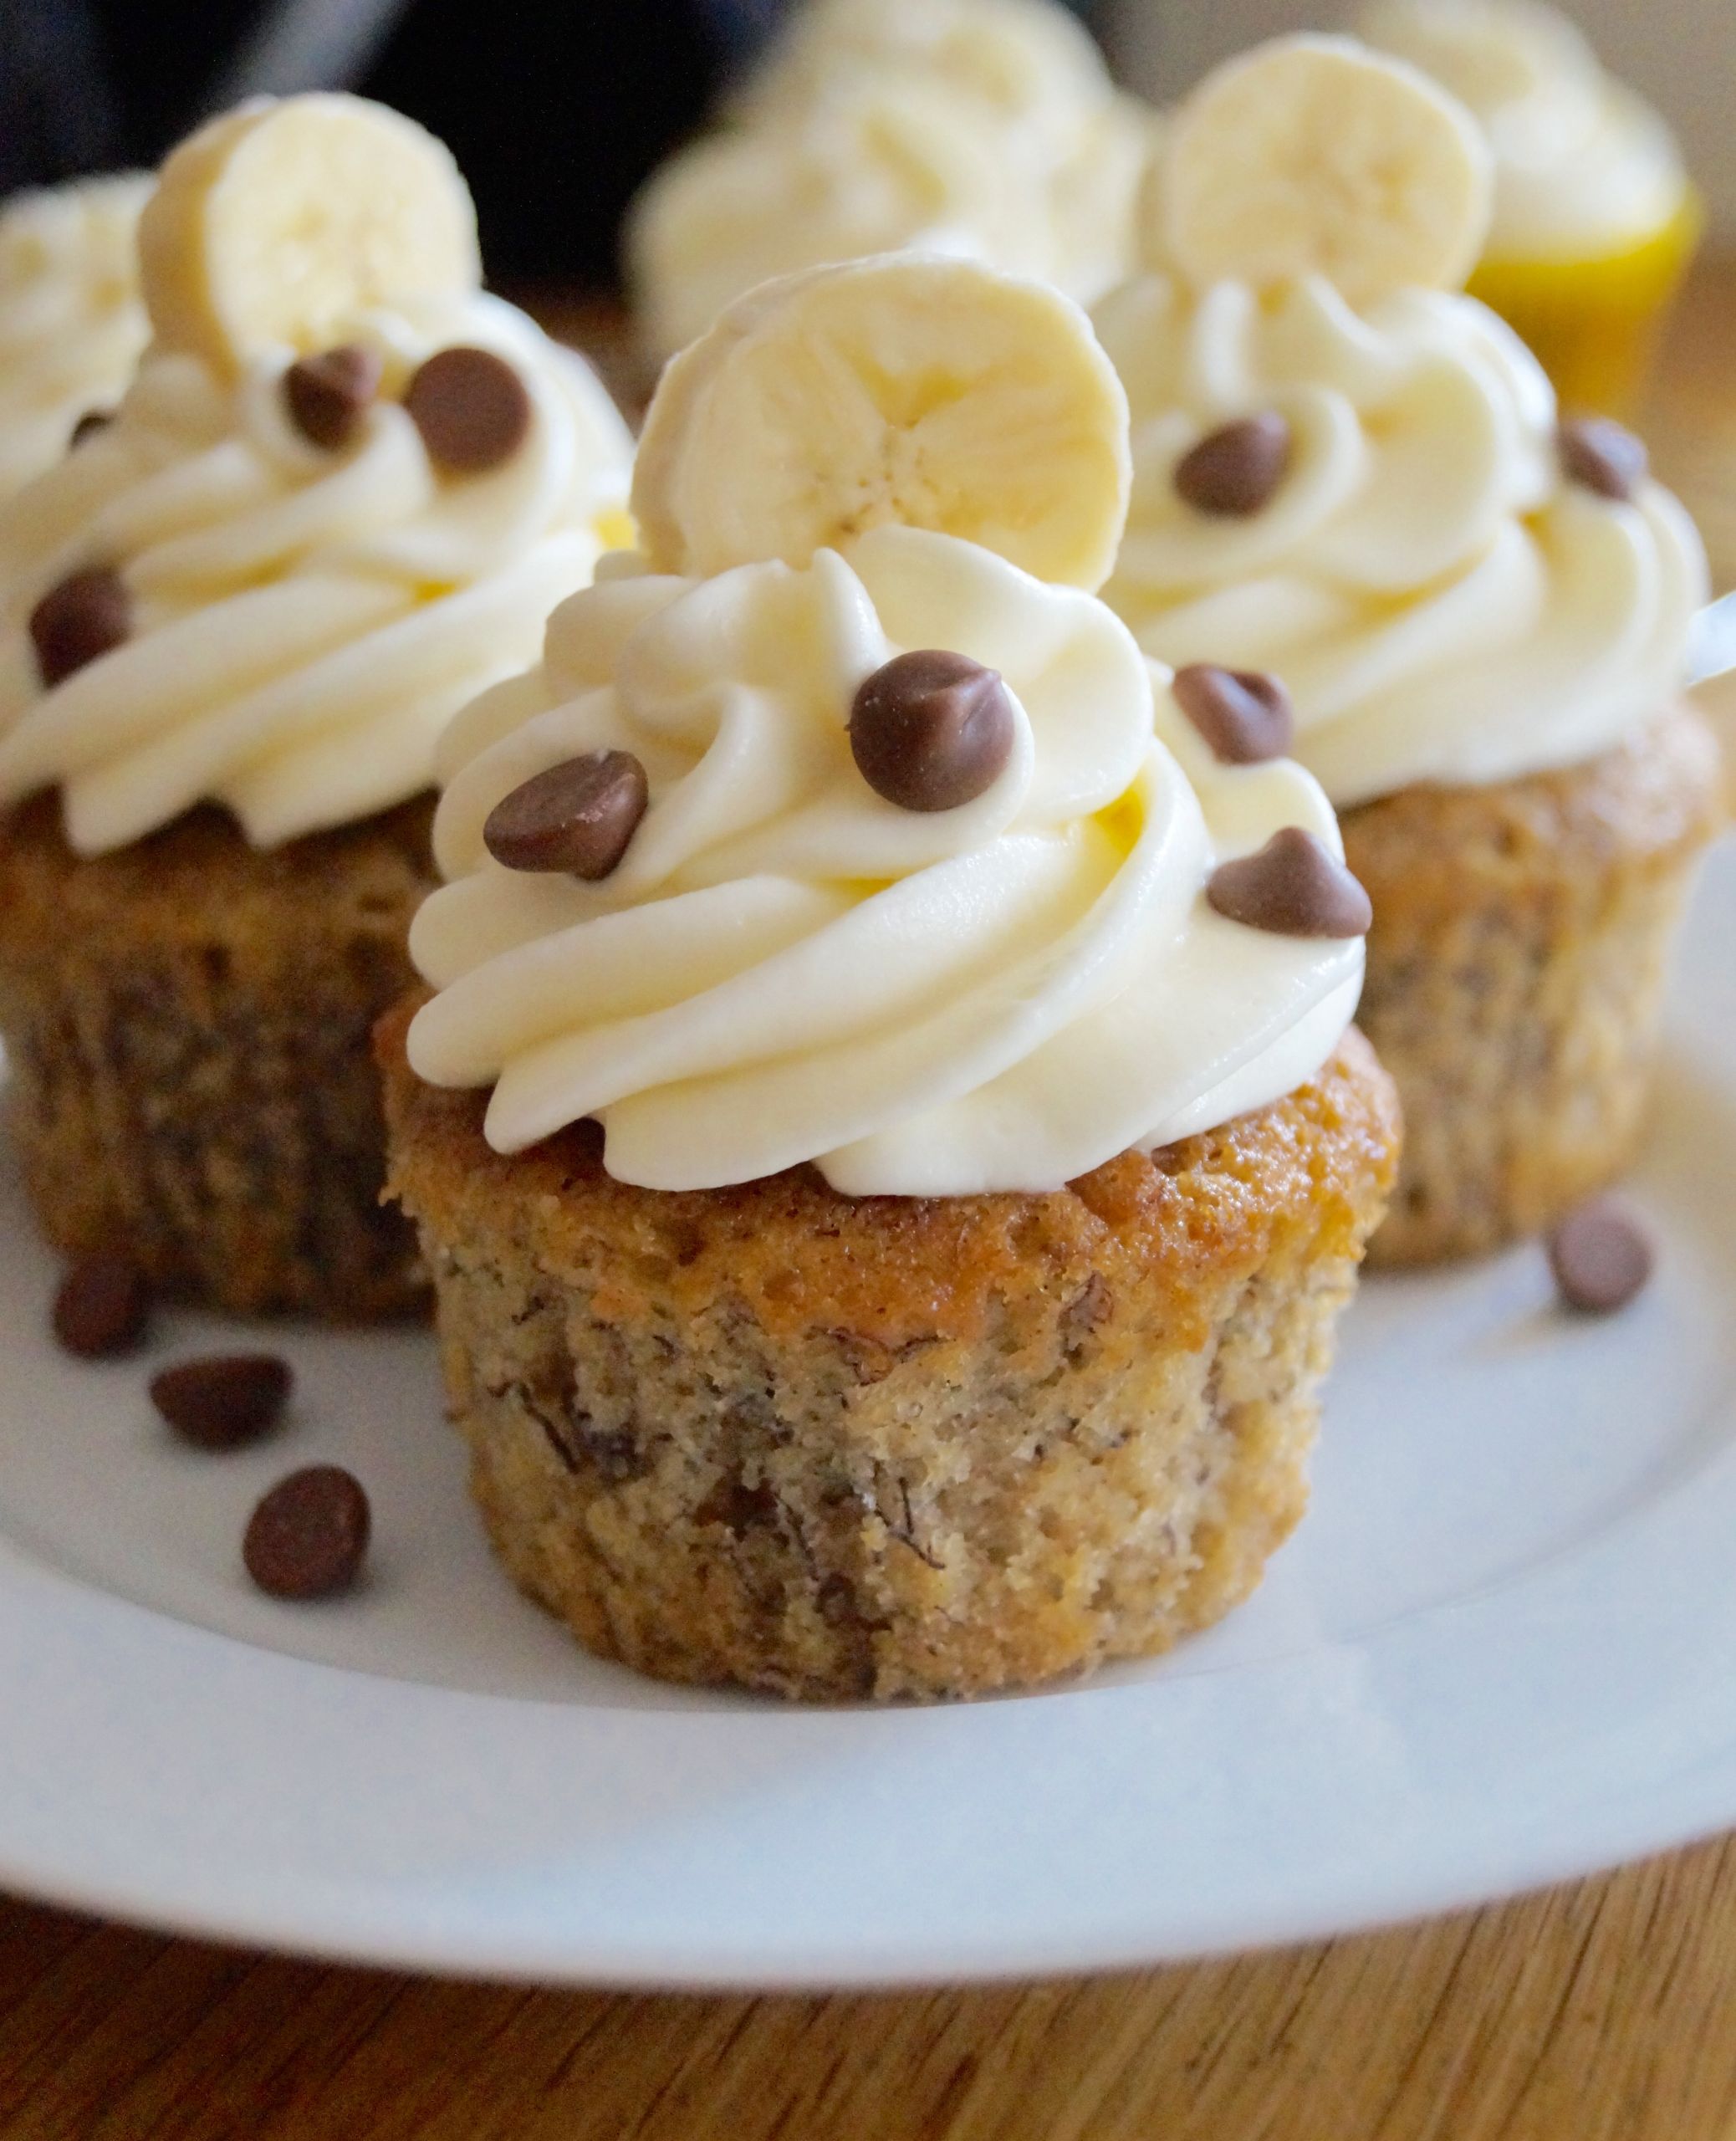 Banana Cupcakes with Cream Cheese Frosting Luxury Banana Cupcakes with Cream Cheese Frosting